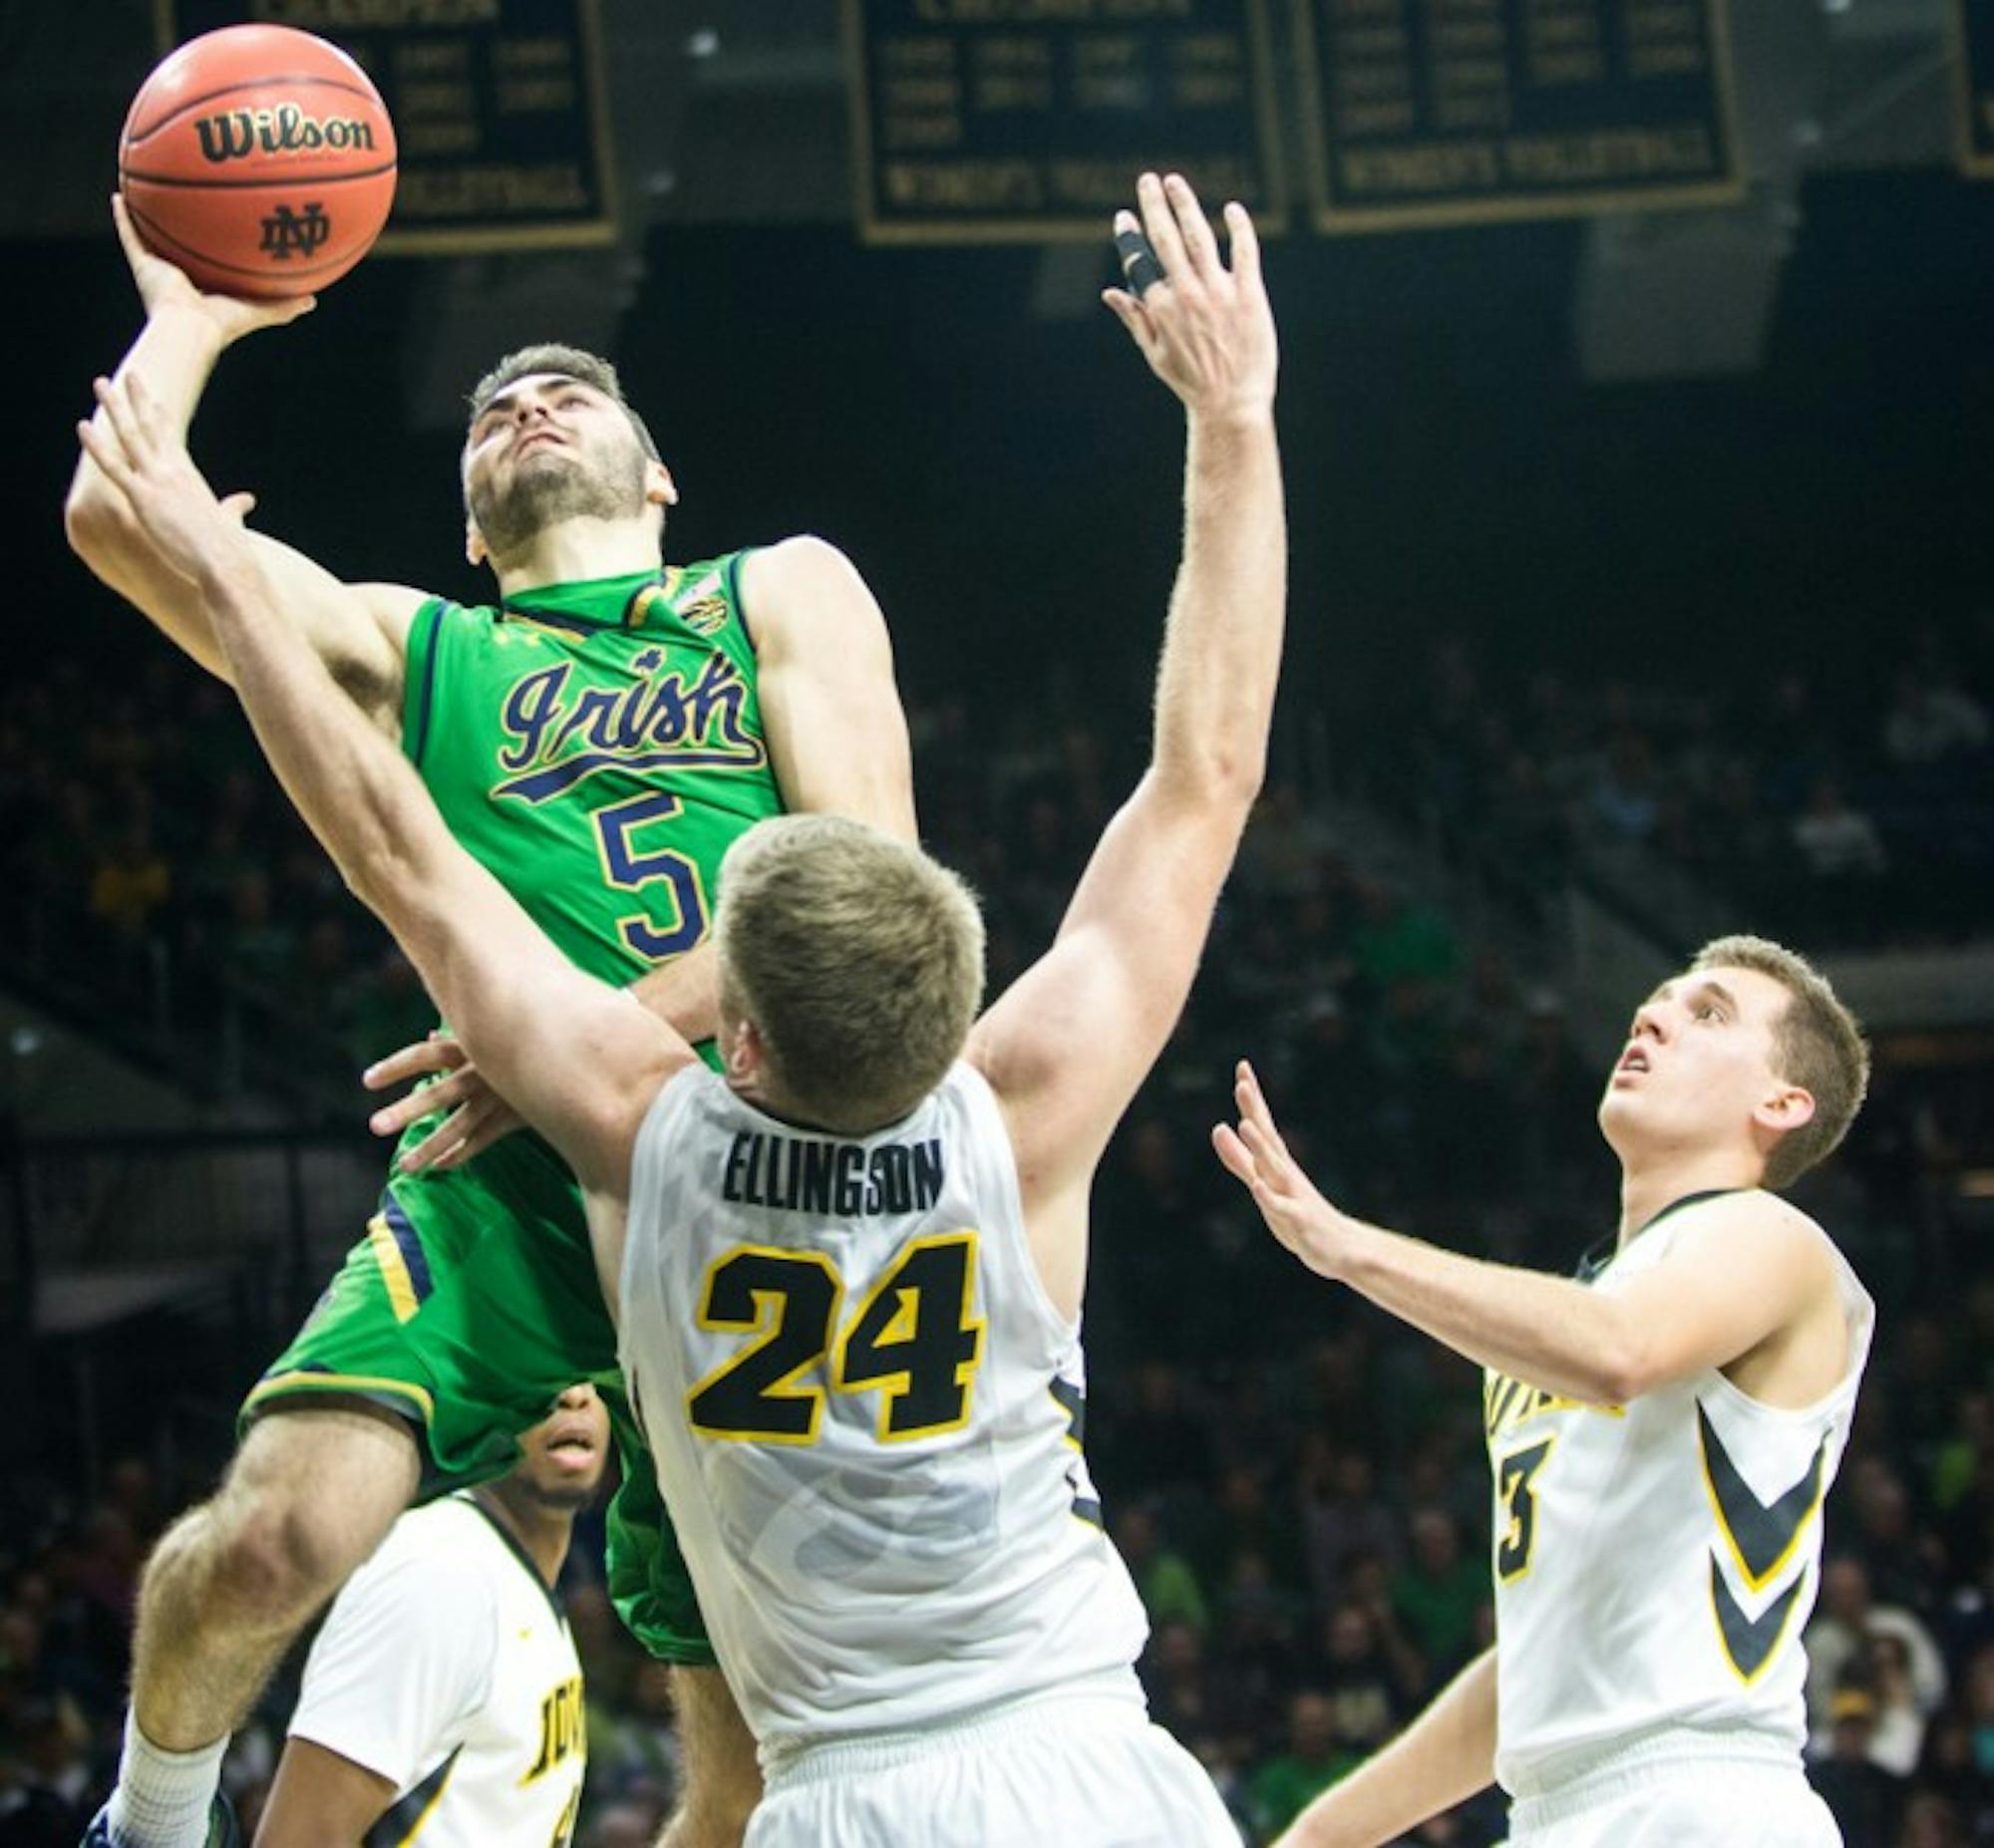 Irish junior guard Matt Farrell jumps into a defender during Notre Dame’s 92-78 victory over Iowa on Tuesday night at Purcell Pavilion. Farrell had 16 points and seven assists in the contest.